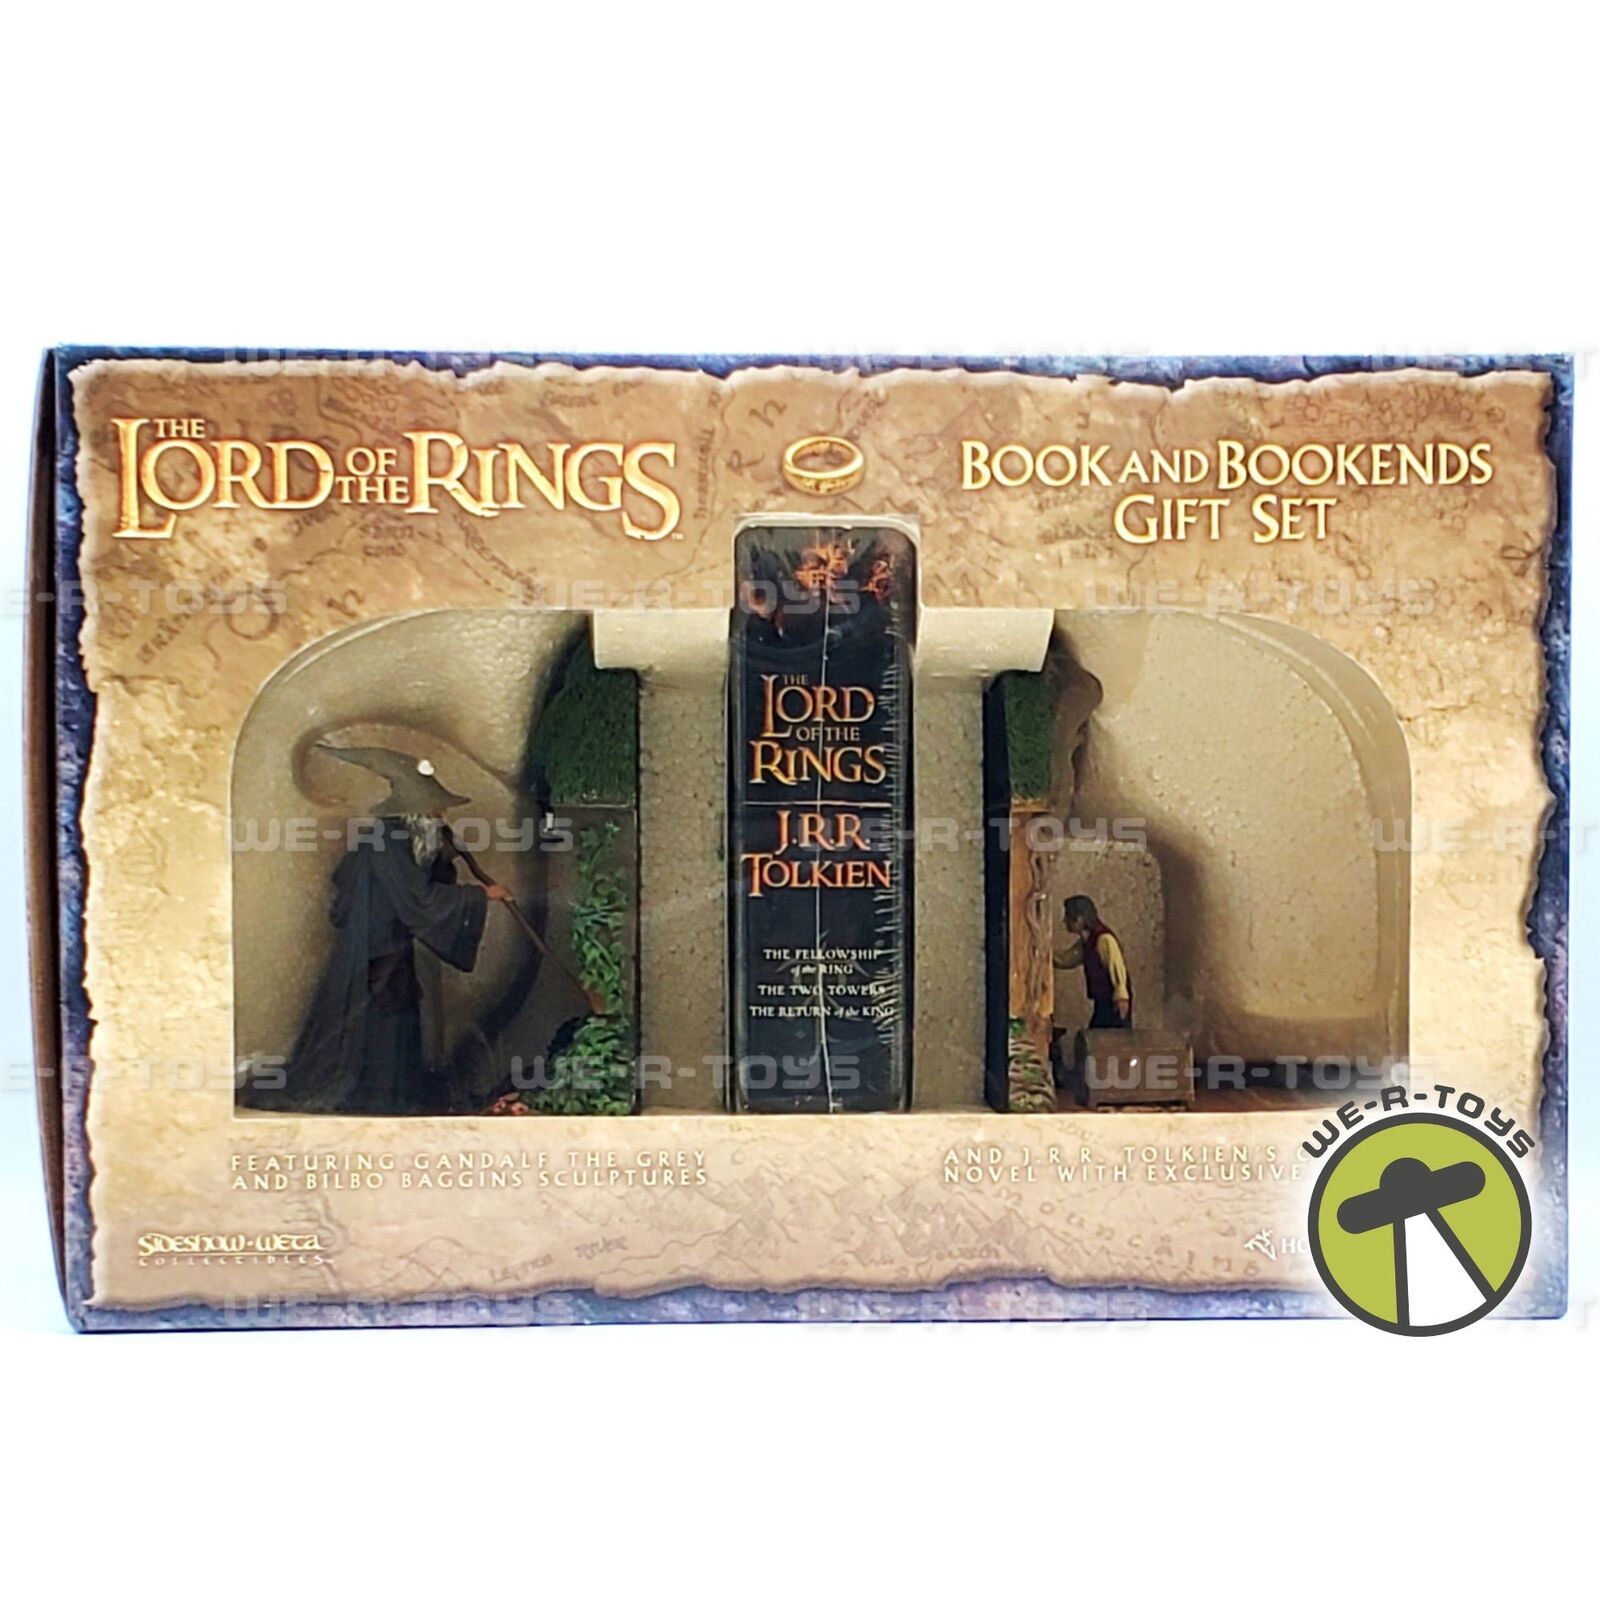 Lord of the Rings Book and Bookends Gift Set Sideshow Weta Collectibles NRFB